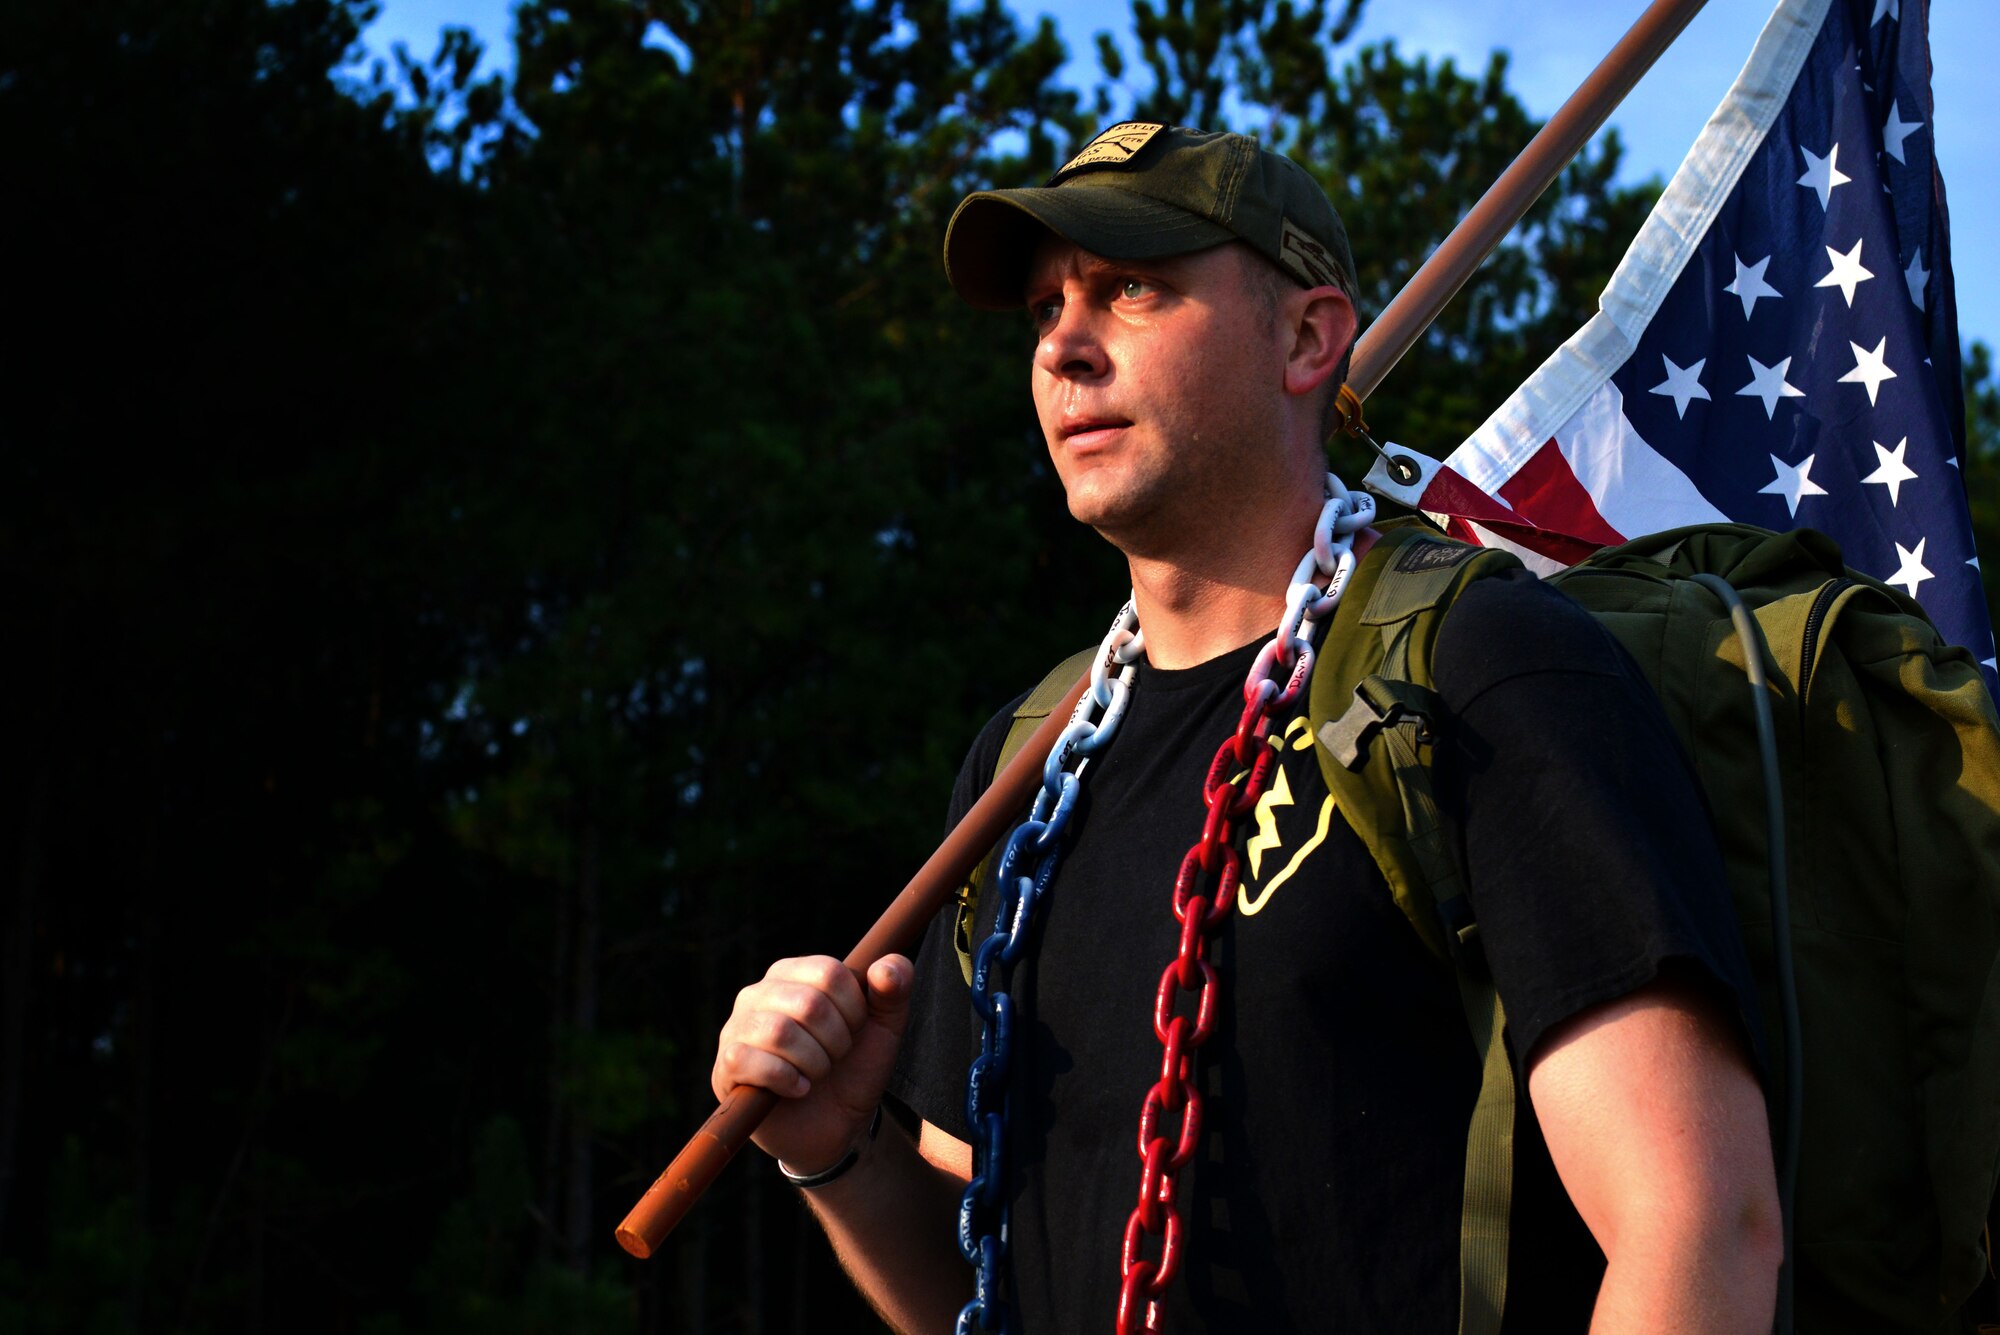 U.S. Army Staff Sgt. Josh Dockery, U.S. Army Central operations noncommissioned officer in charge, holds an American flag during a 9/11 Memorial Ruck/Walk at Shaw Air Force Base, S.C., Sept. 9, 2016. Approximately 80 participants rucked 9.11 miles in commemoration of those who lost their lives on Sept. 11, 2001. (U.S. Air Force photo by Airman 1st Class Destinee Sweeney)